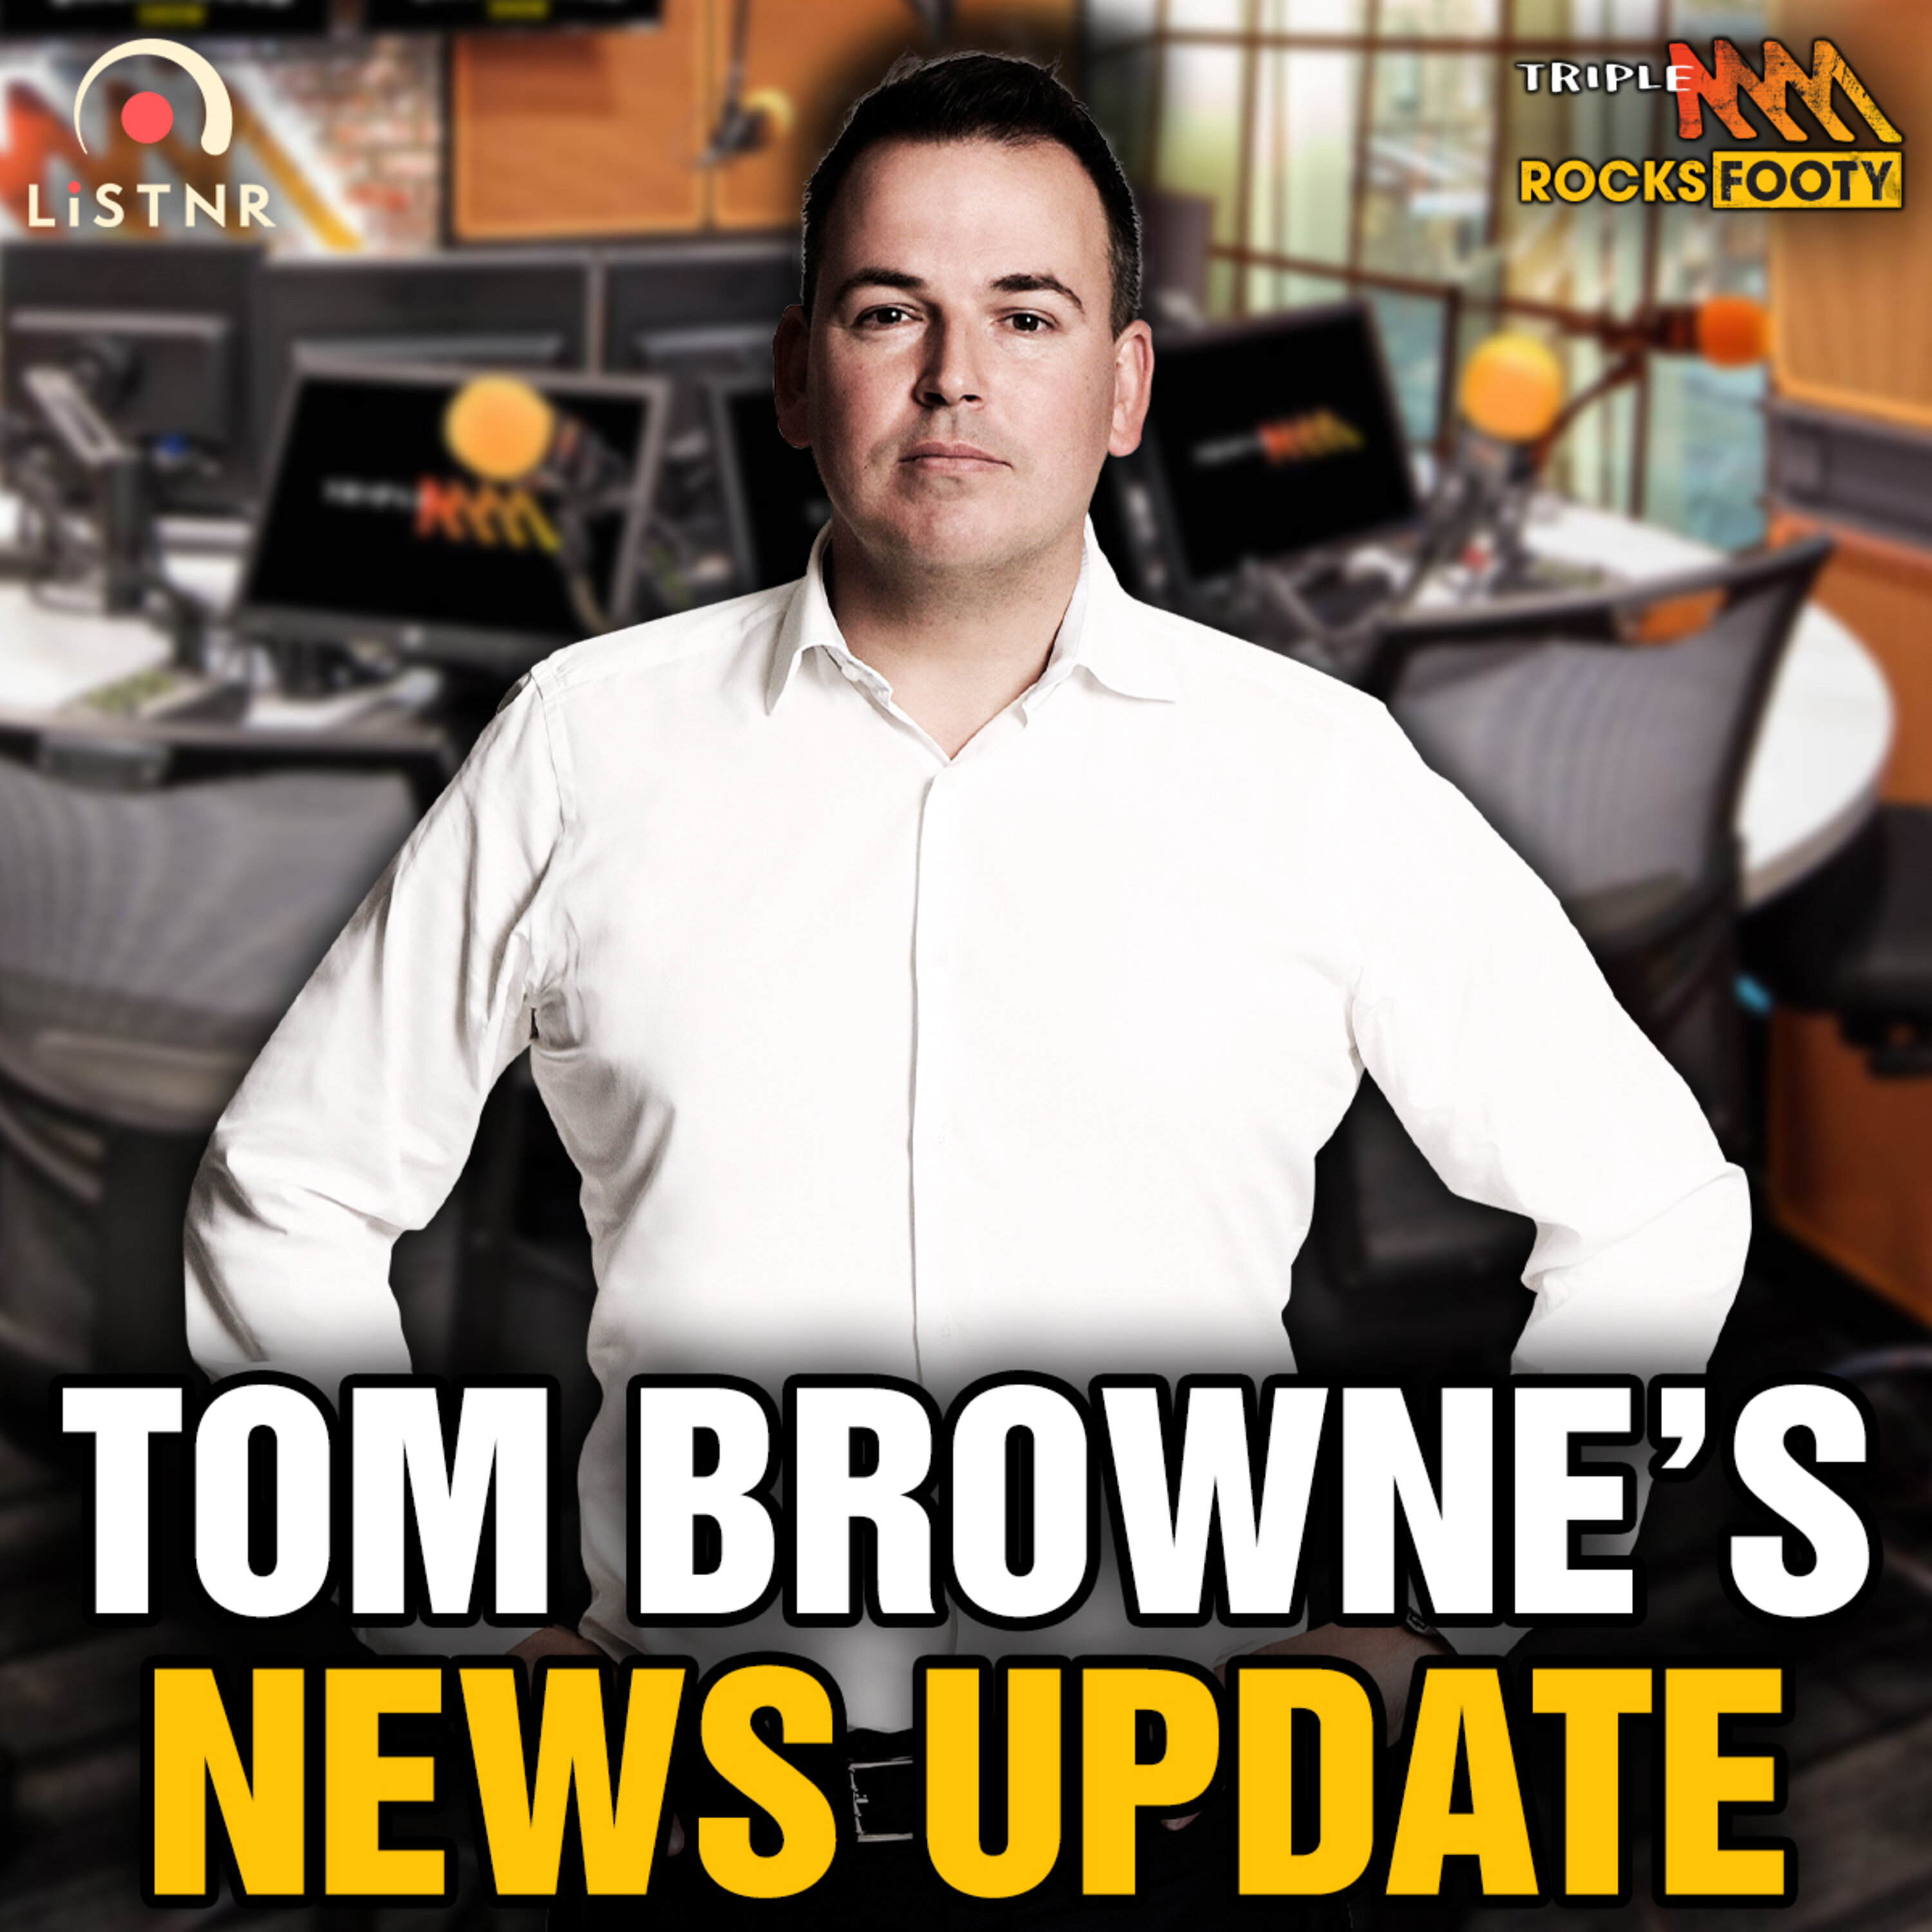 Tom Browne's News | Brownlow fallout, Chris Scott's comments on North Melbourne's priority picks, Hawks 2013 reunion